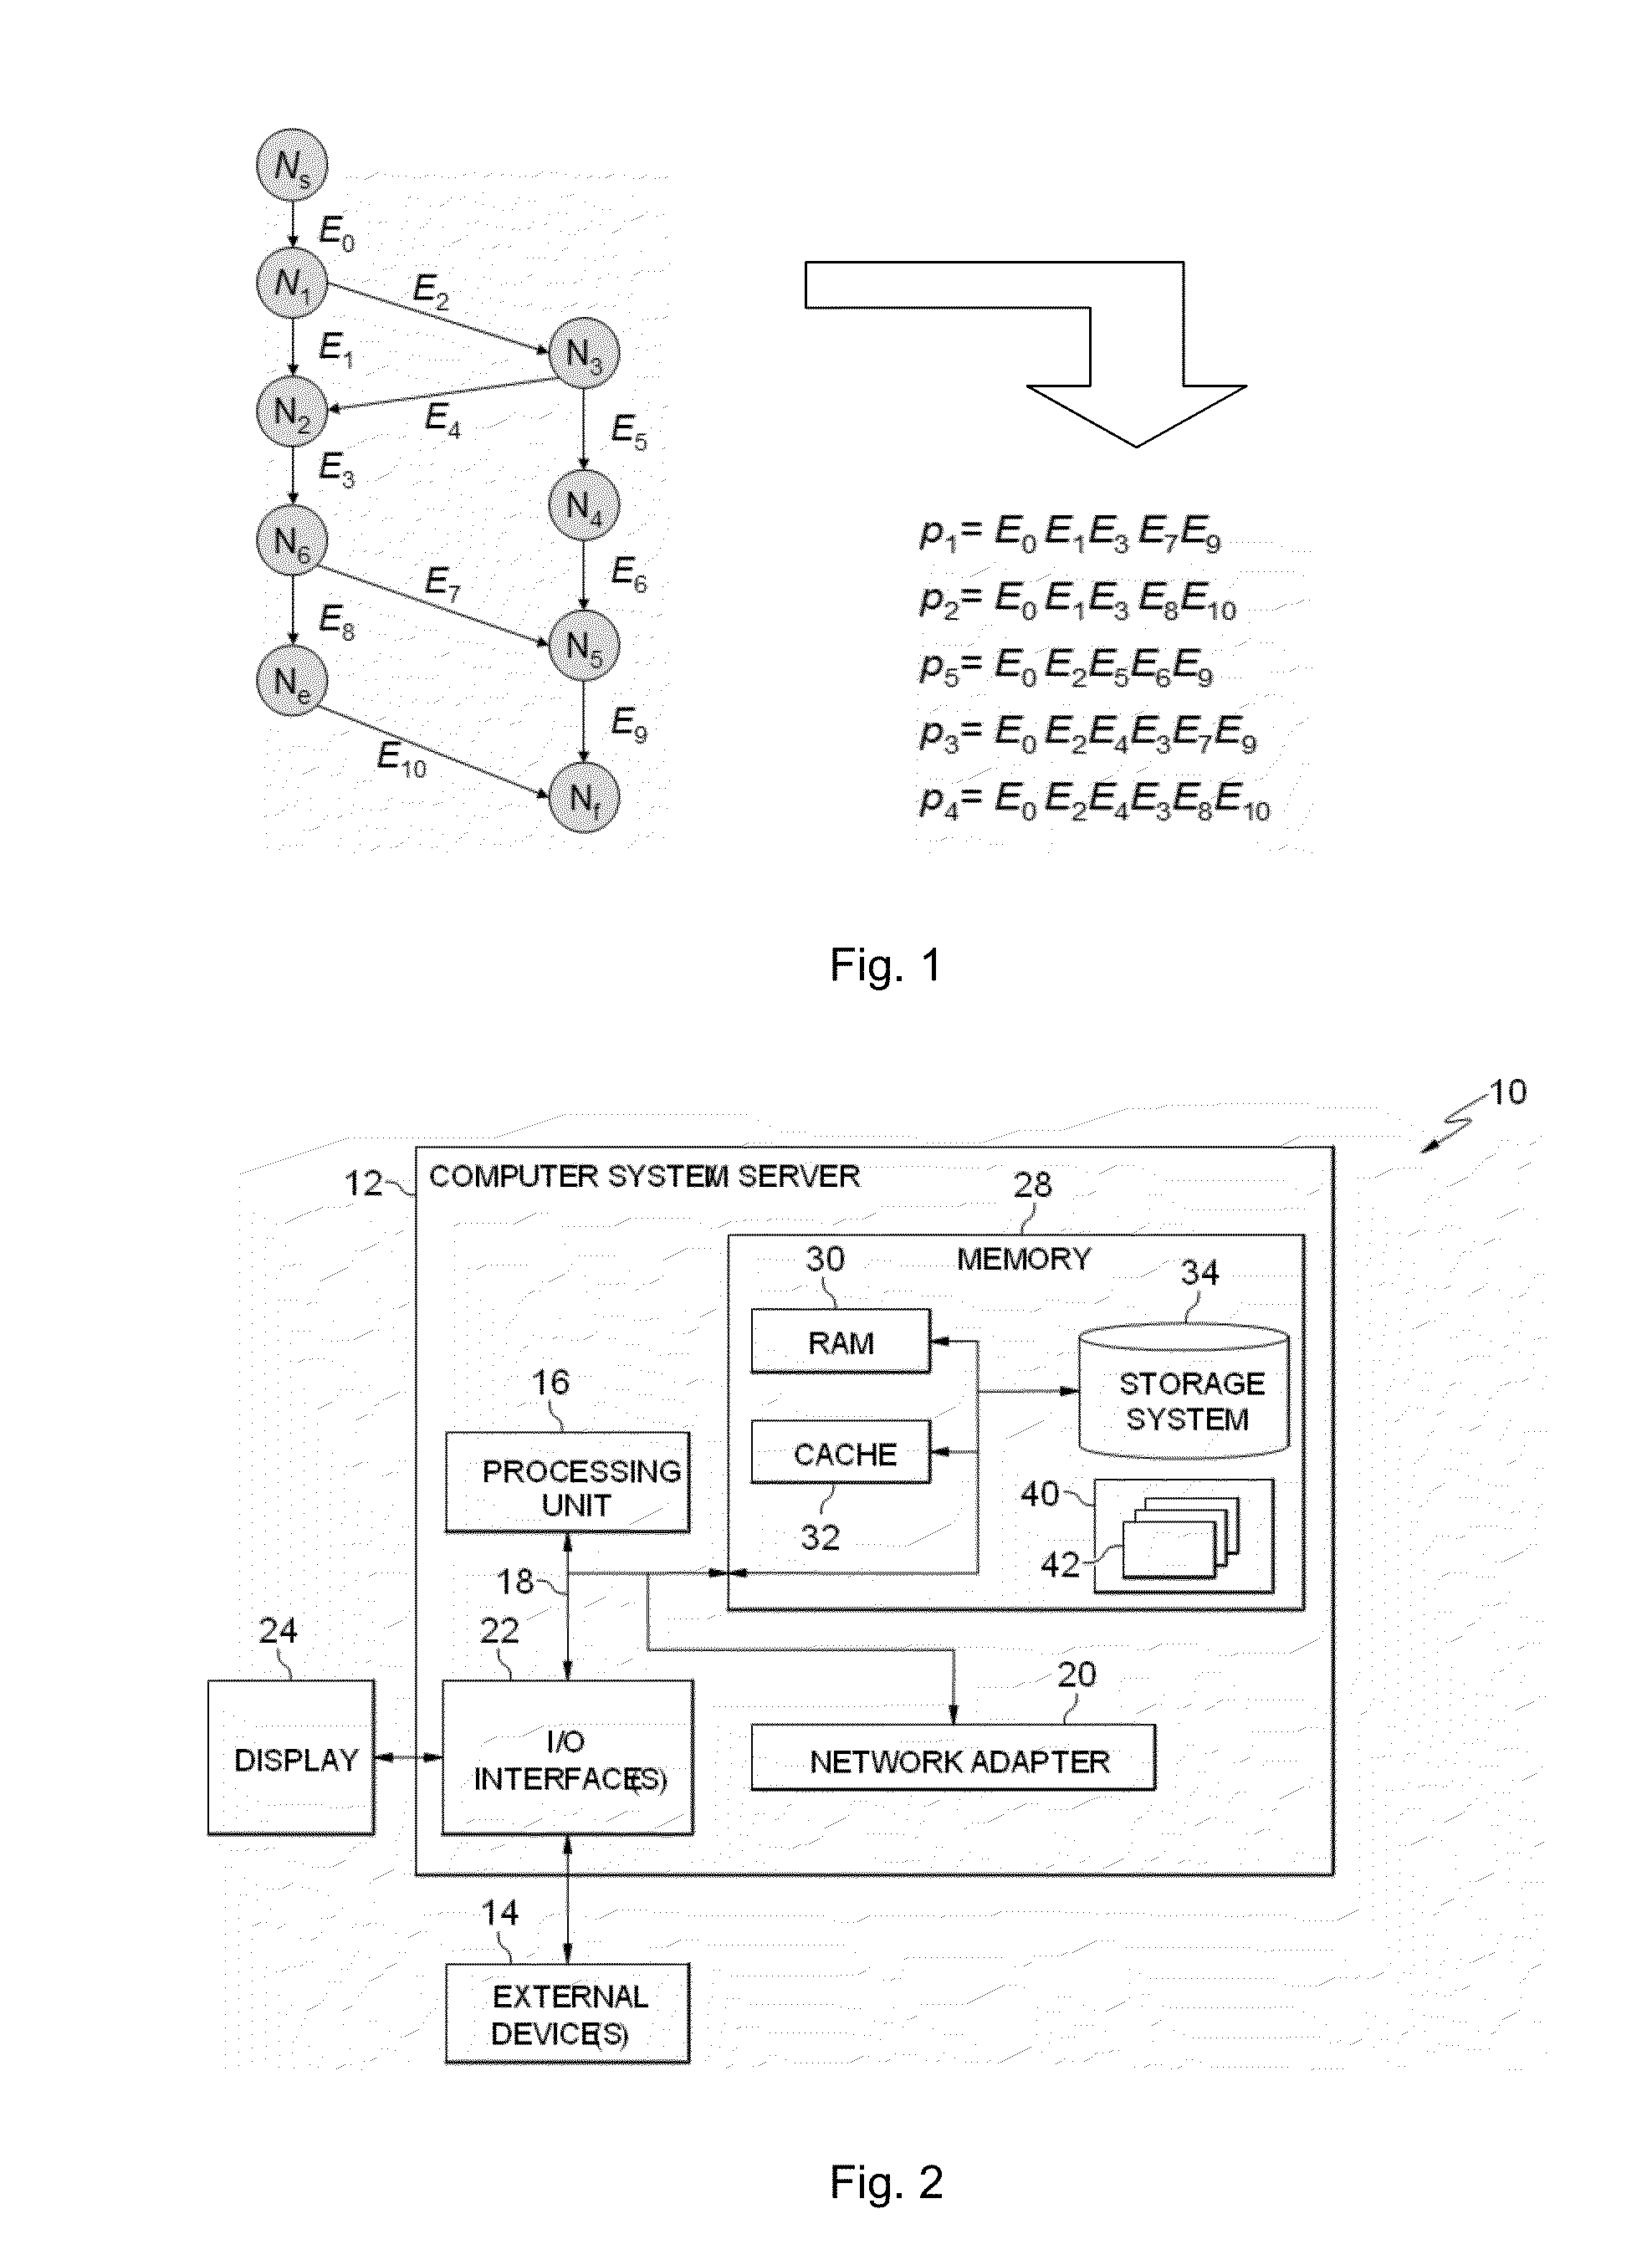 Method and apparatus for providing test cases